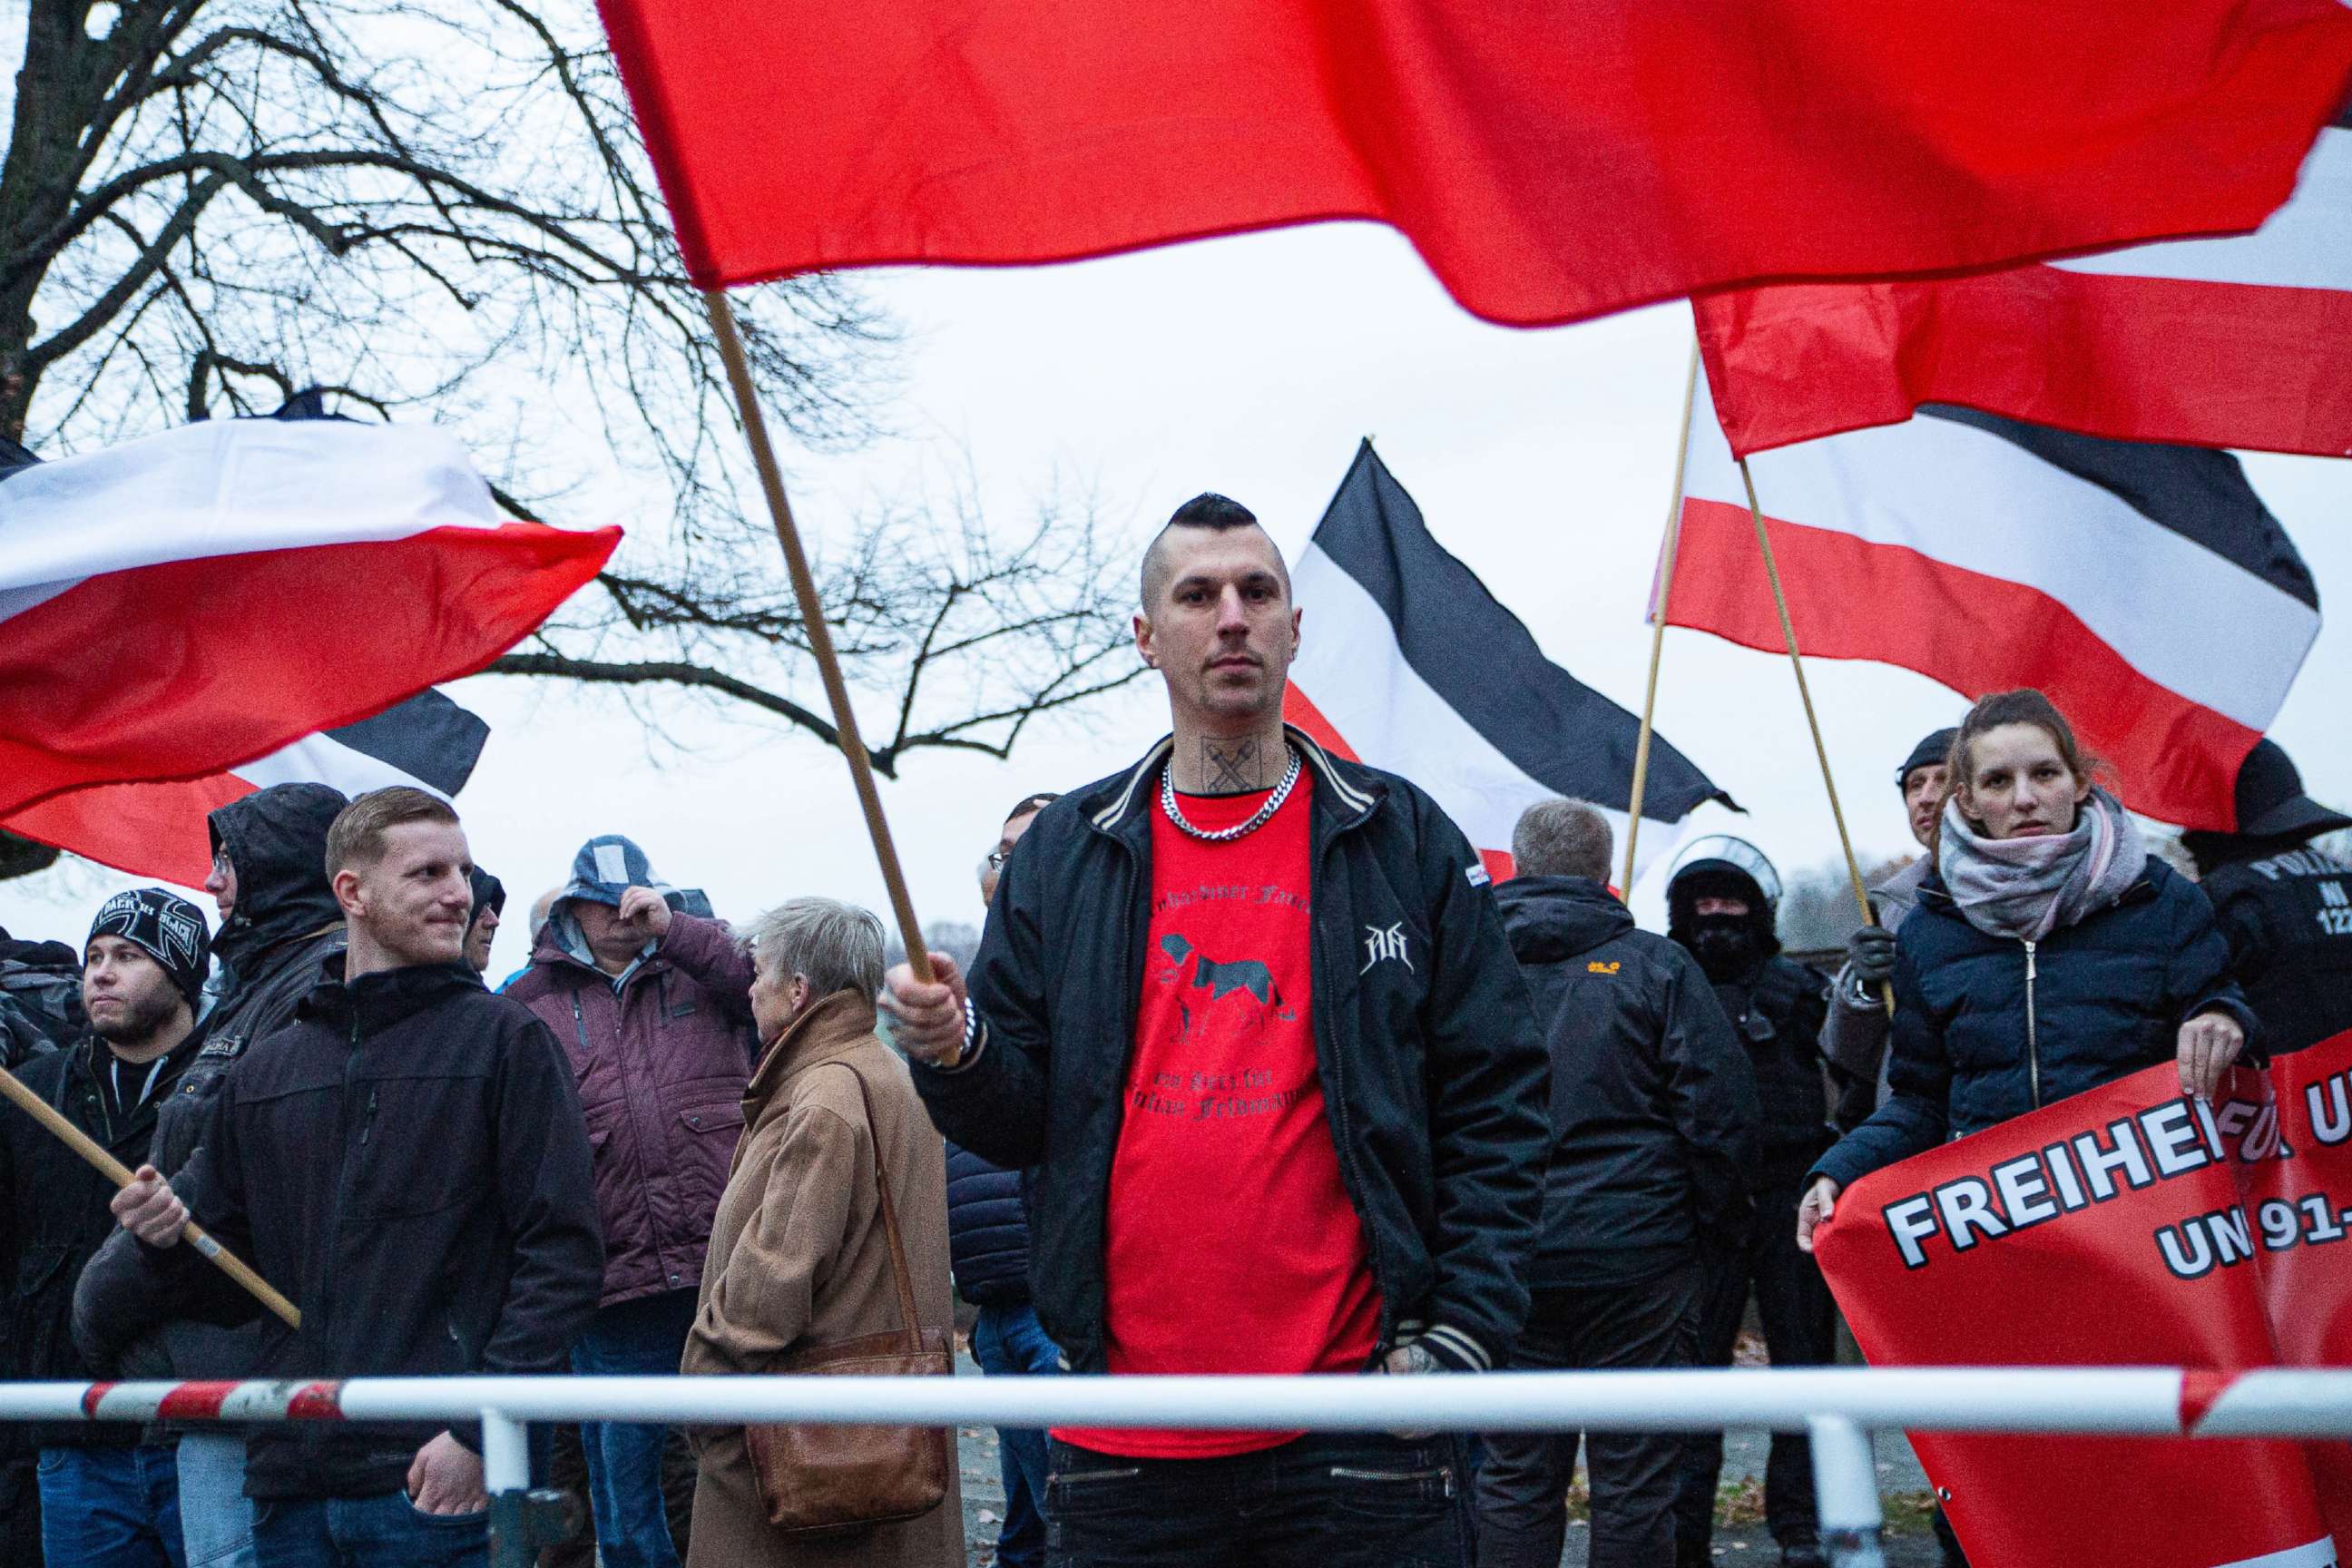 PHOTO: Robin Schmiemann during a neo-Nazi and right-wing supporters protest march to voice their anger at the reporting by journalists Julian Feldmann, David Janzen and Andre Aden on Nov. 23, 2019 in Hanover, Germany.